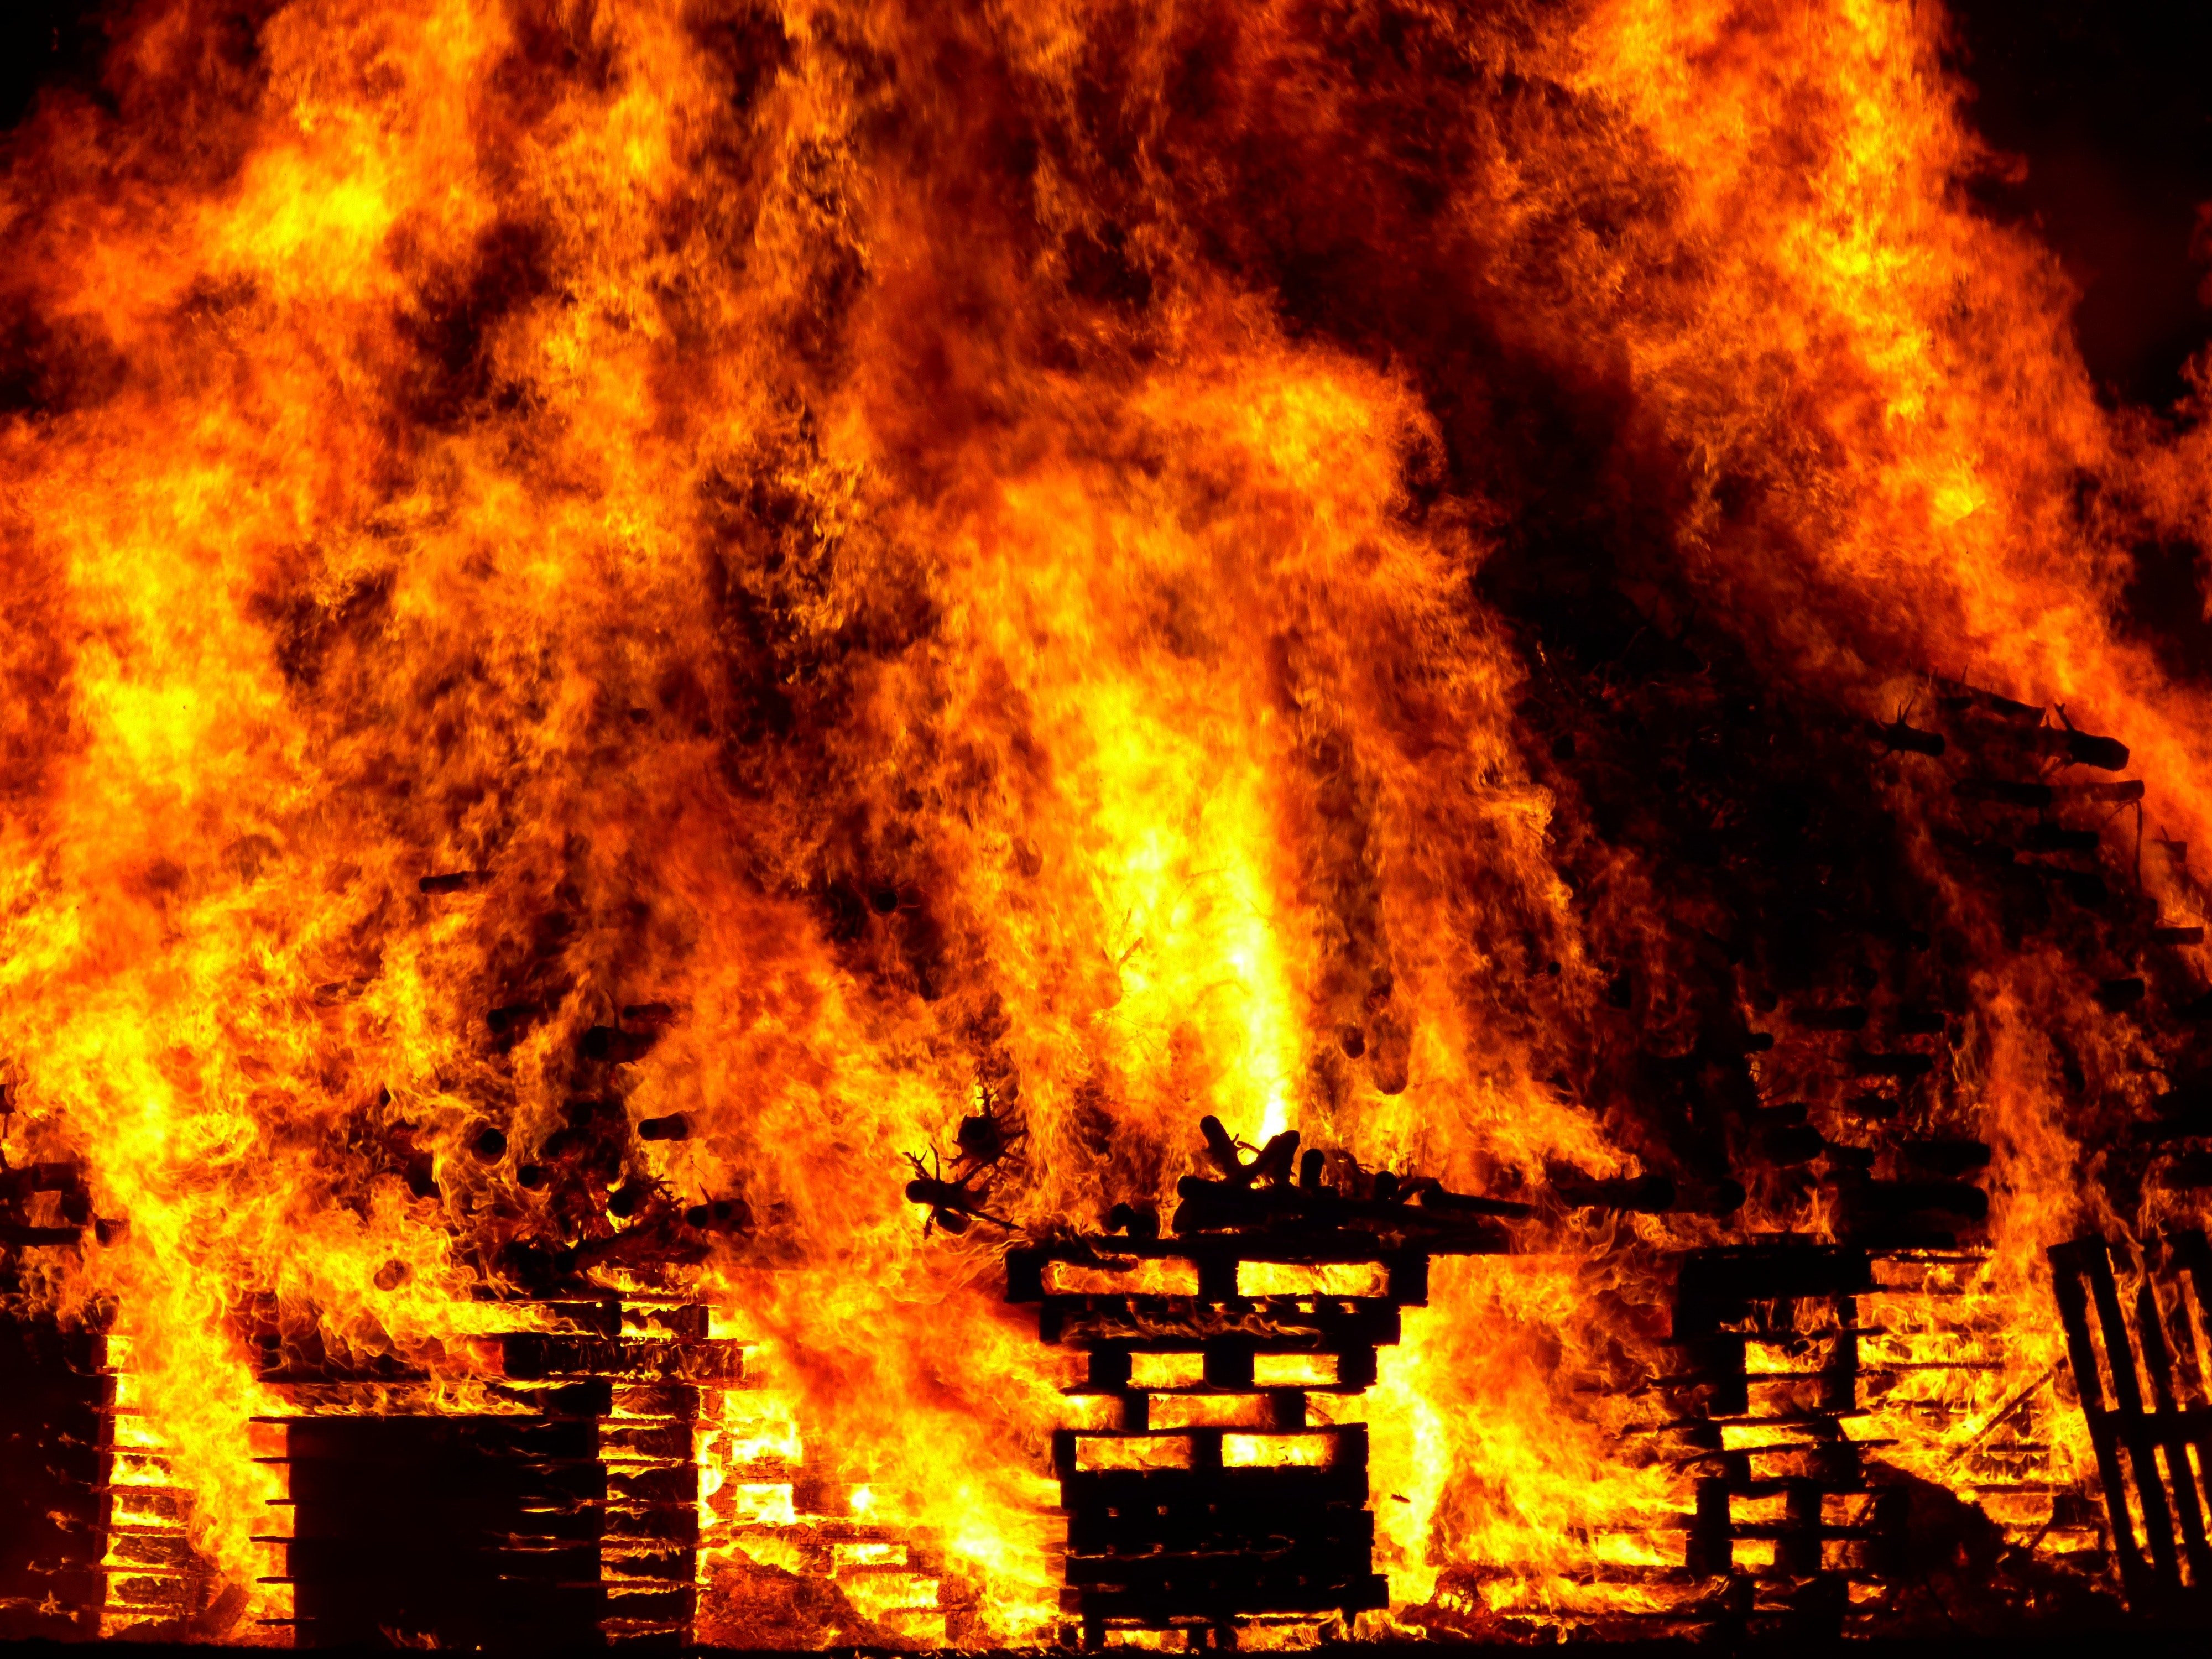 A raging house fire. | Photo: Pexels/ Pixabay